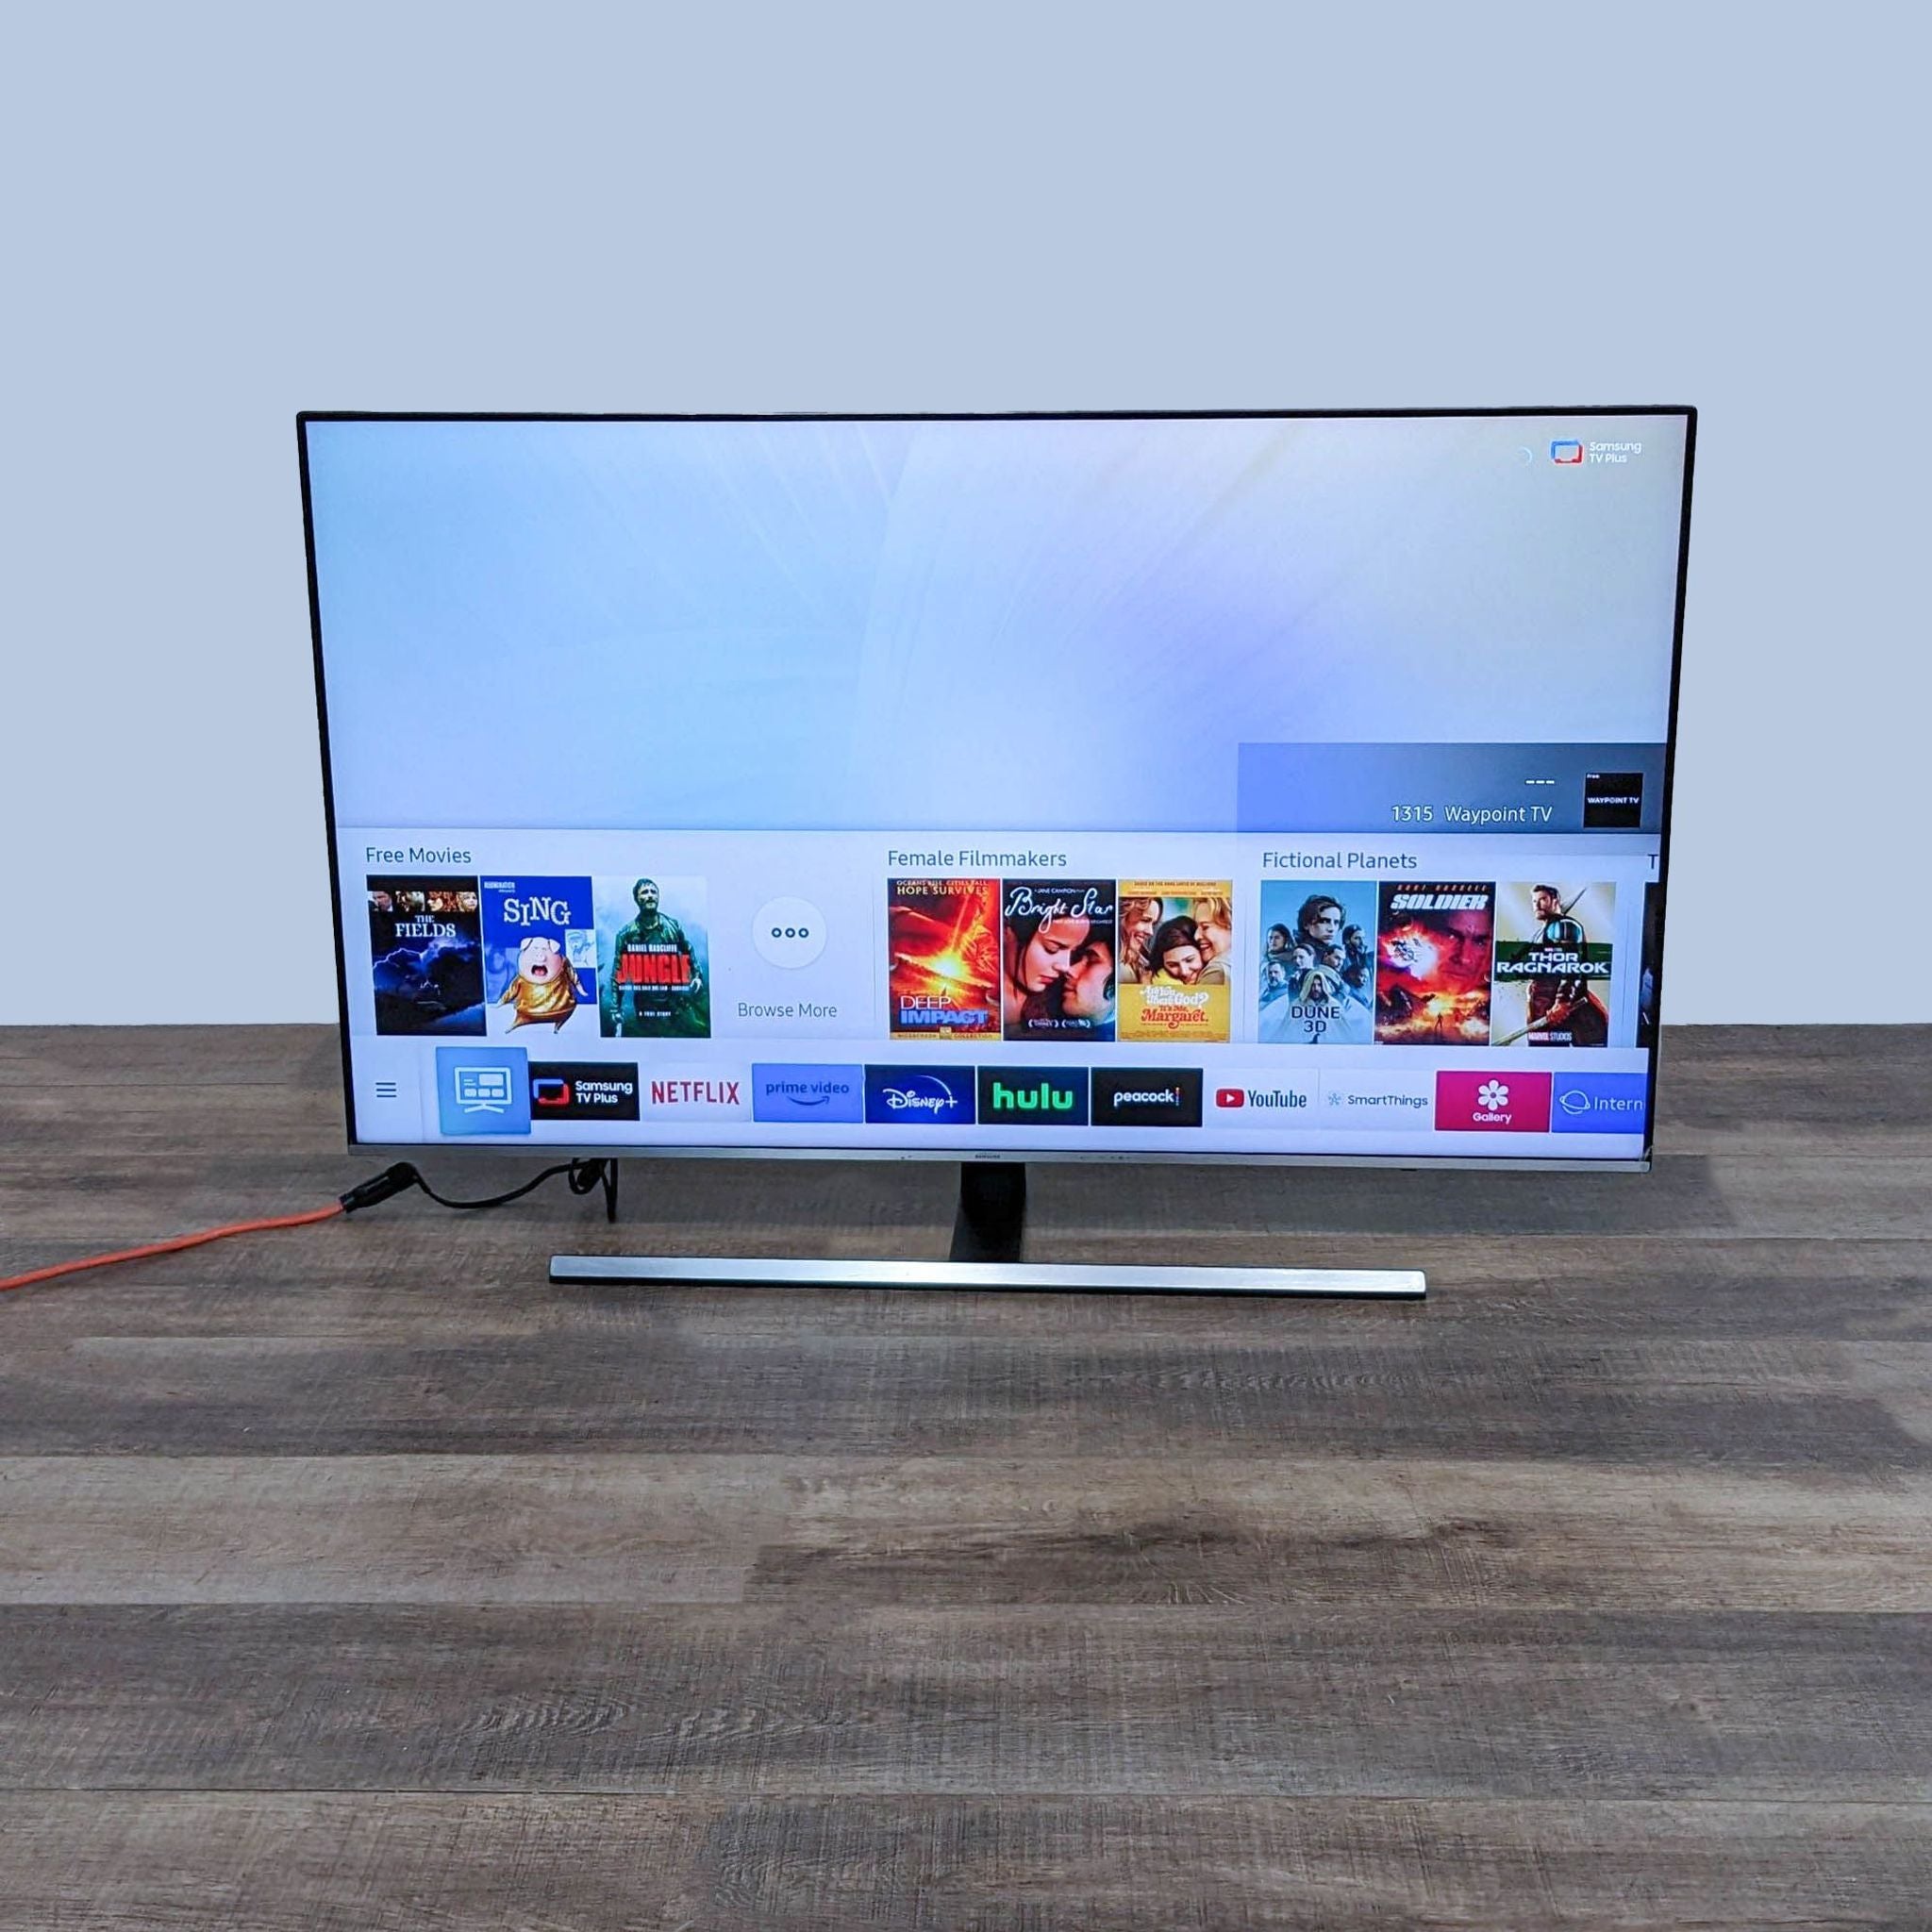 Samsung UN55NU8000F flat LED TV displaying smart interface with apps on screen, on a wooden surface.